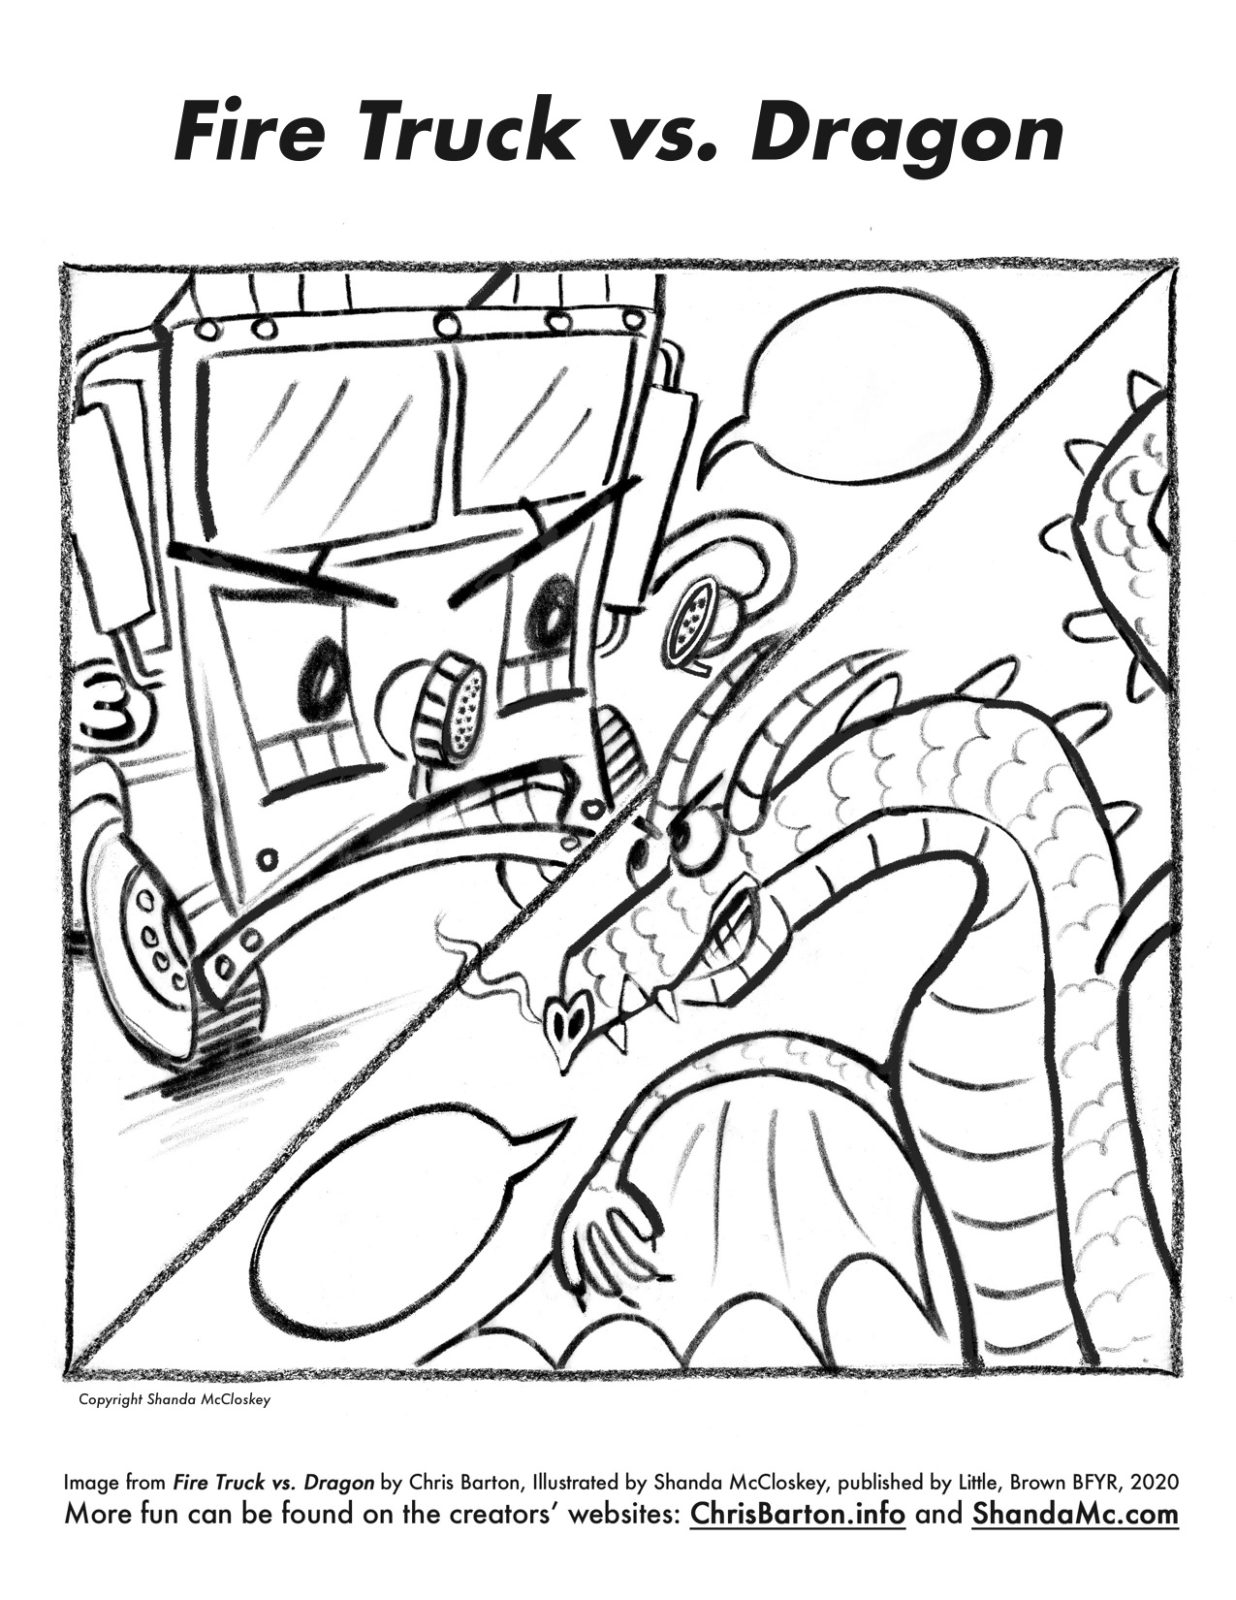 Fire Truck vs. Dragon coloring sheet about to battle.